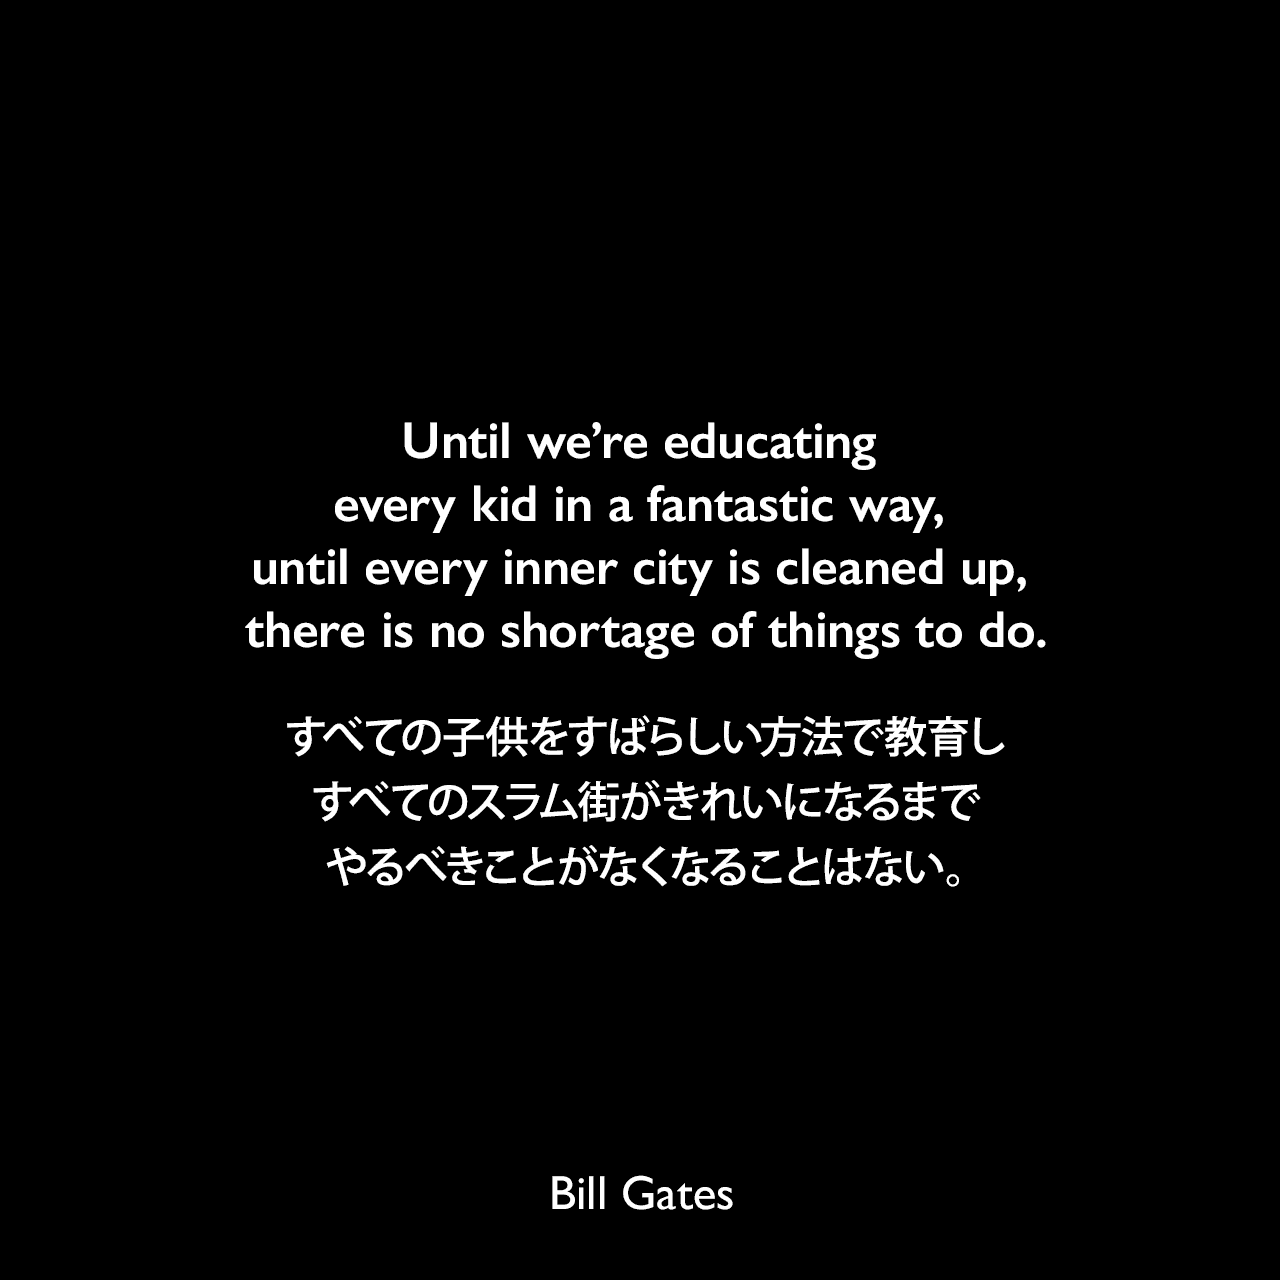 Until we’re educating every kid in a fantastic way, until every inner city is cleaned up, there is no shortage of things to do.すべての子供をすばらしい方法で教育し、すべてのスラム街がきれいになるまで、やるべきことがなくなることはない。Bill Gates